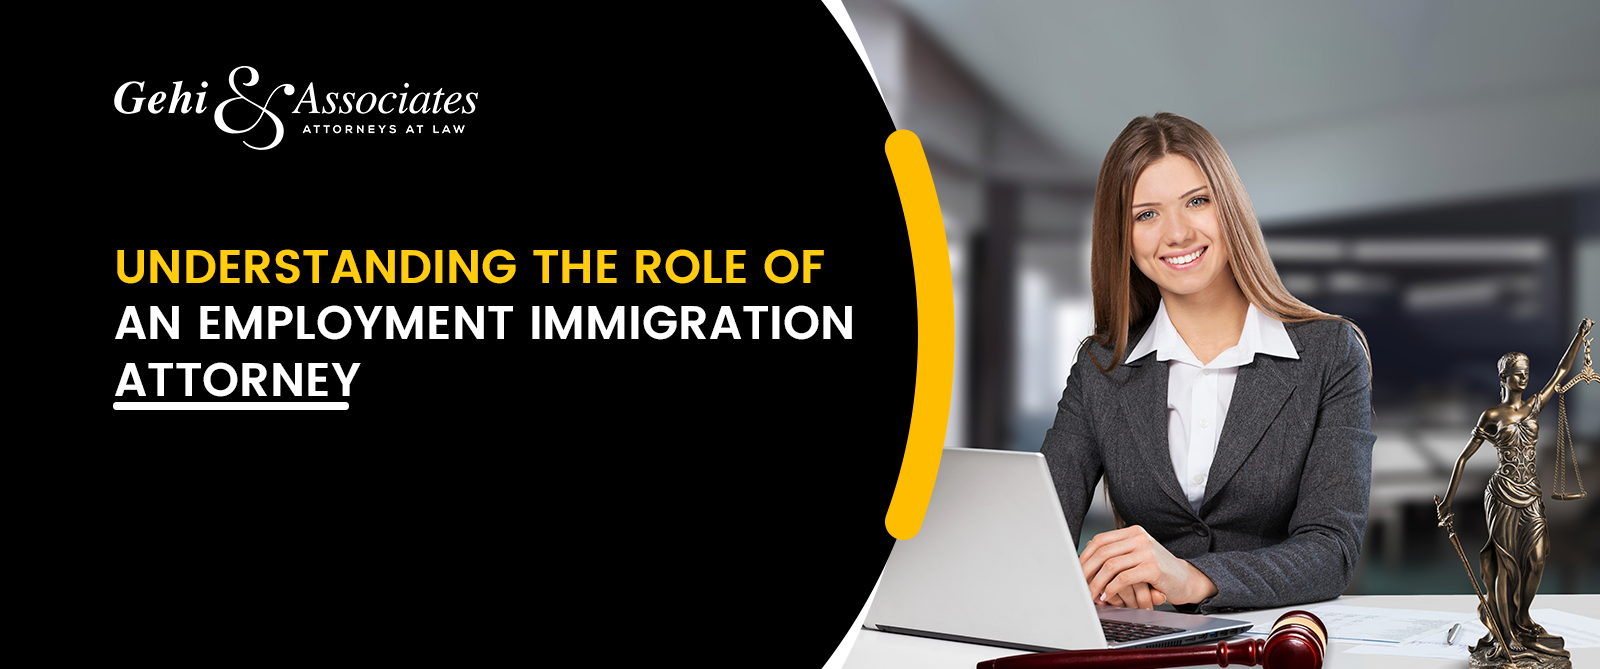 The Role Of An Employment Immigration Attorney in Texas